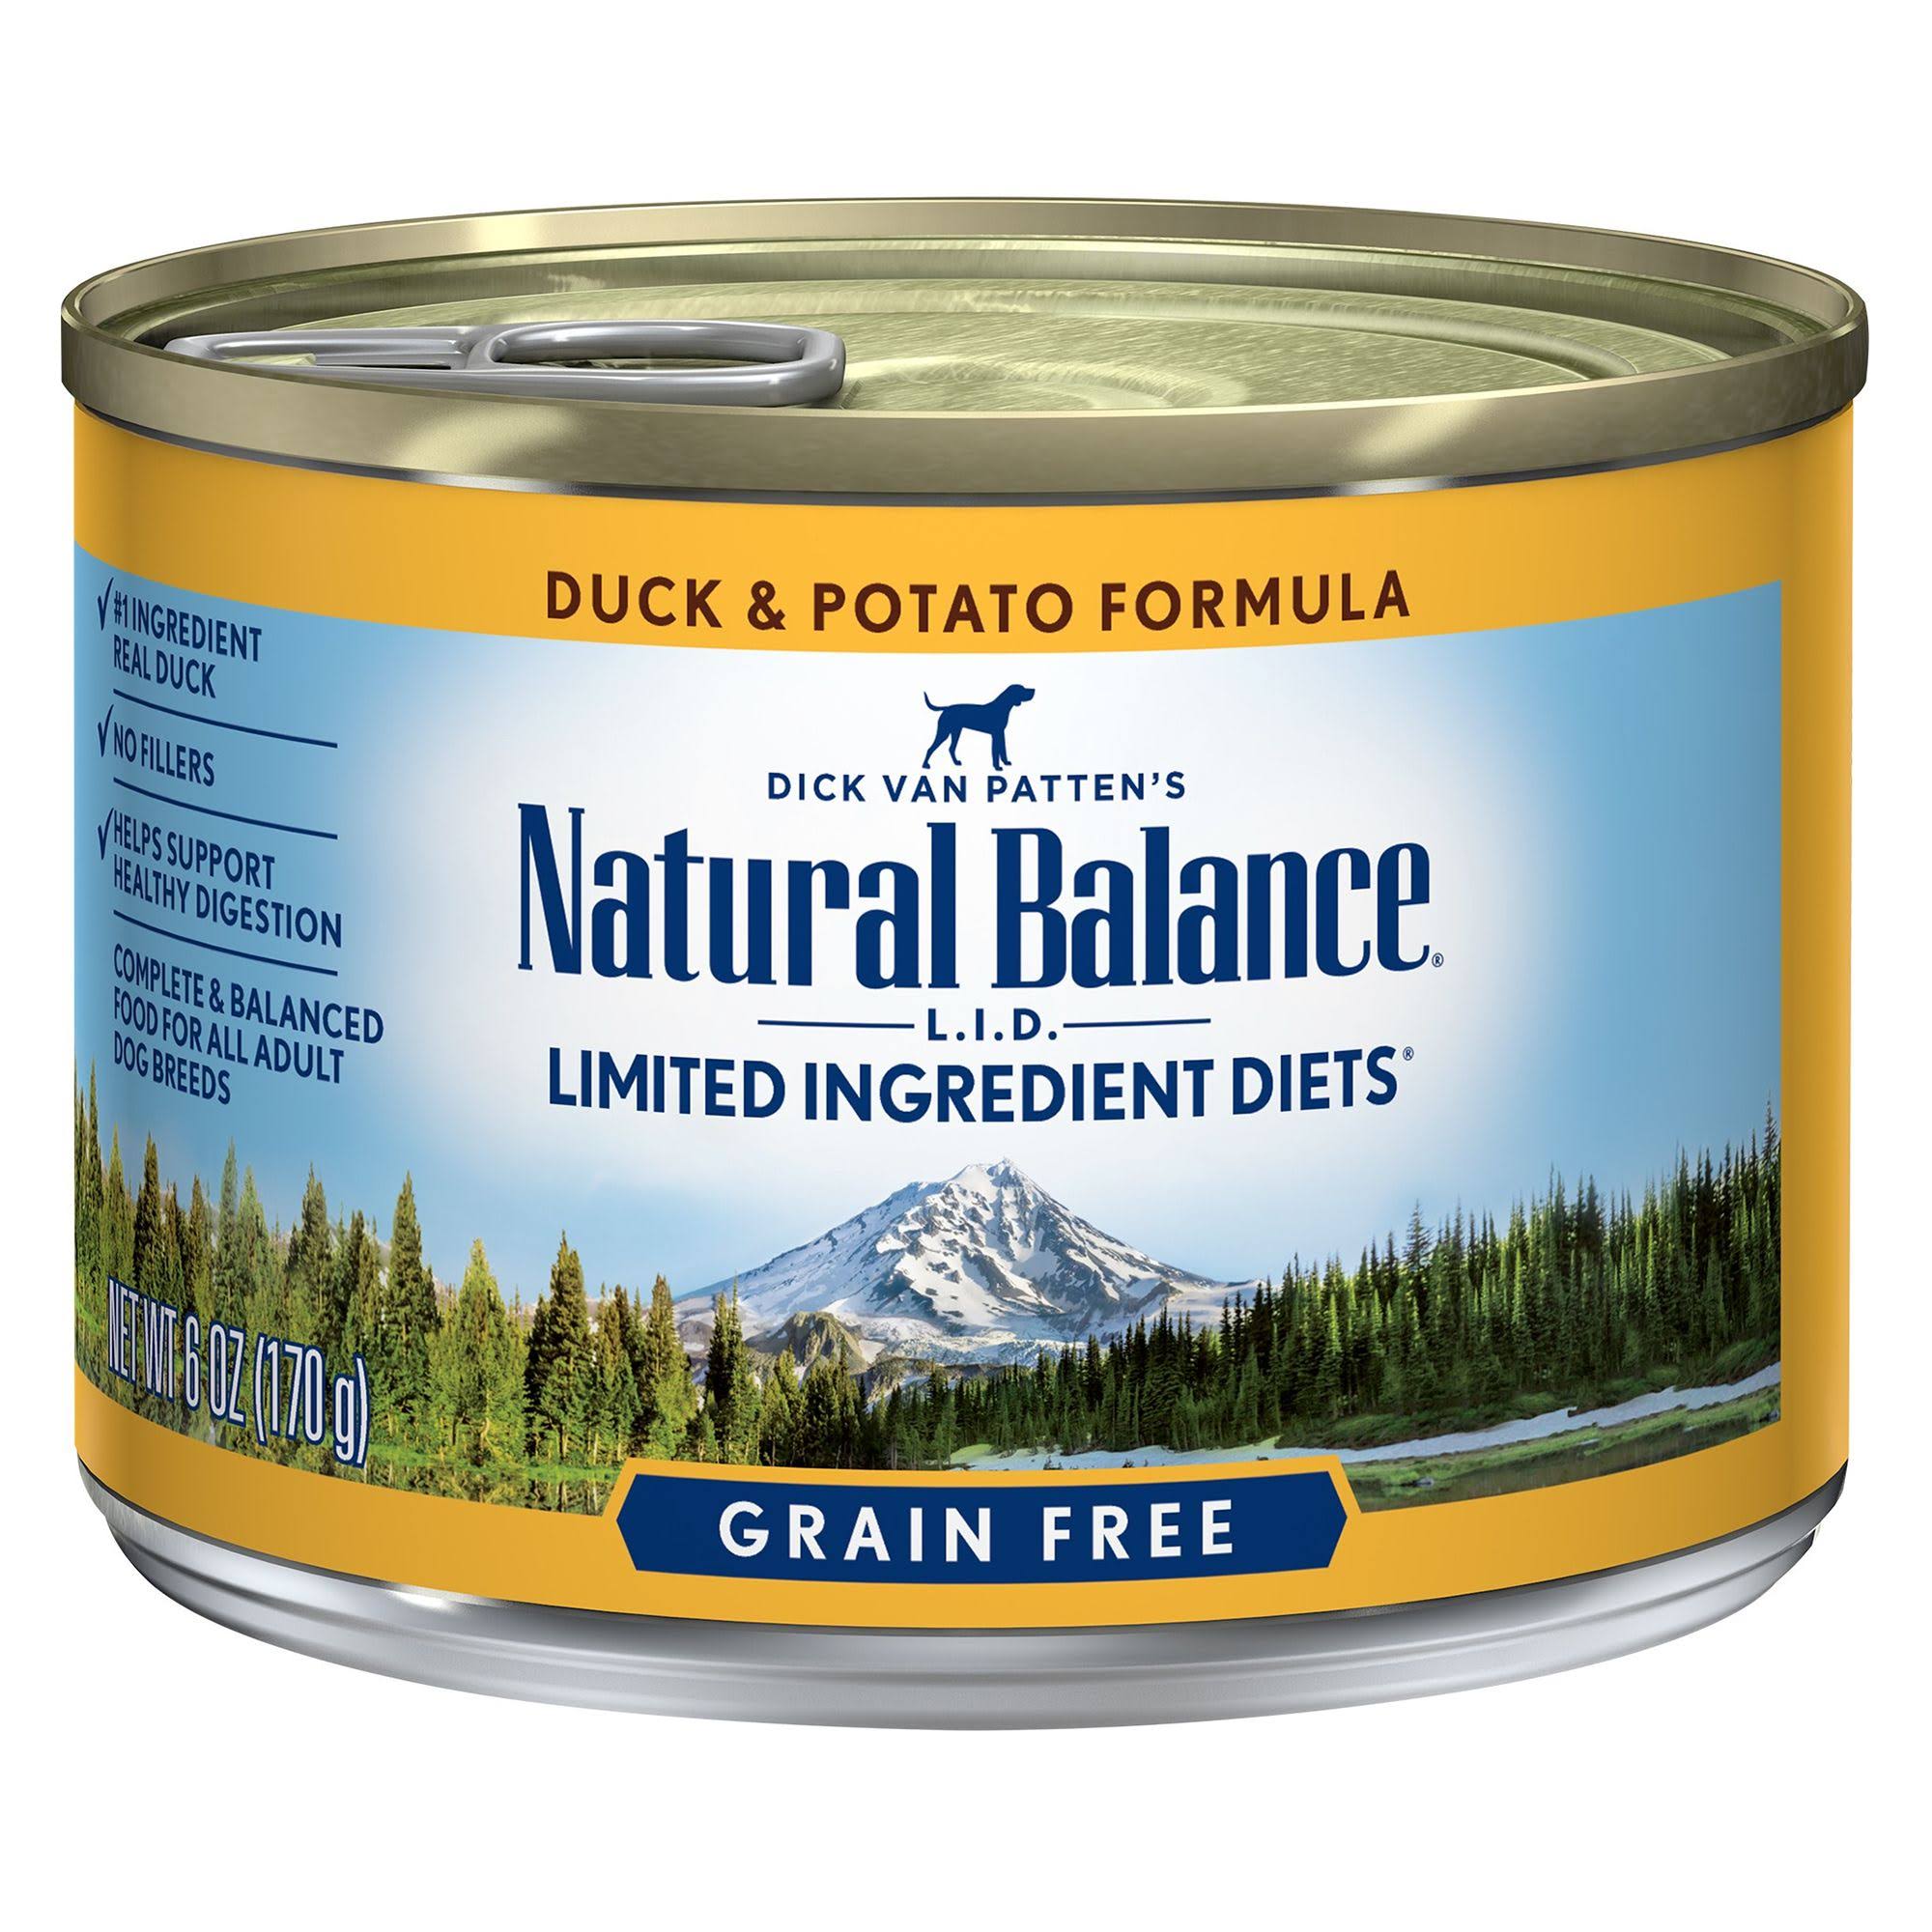 Natural Balance Pet Food L.I.D. Canned Dog Food - Duck and Potato